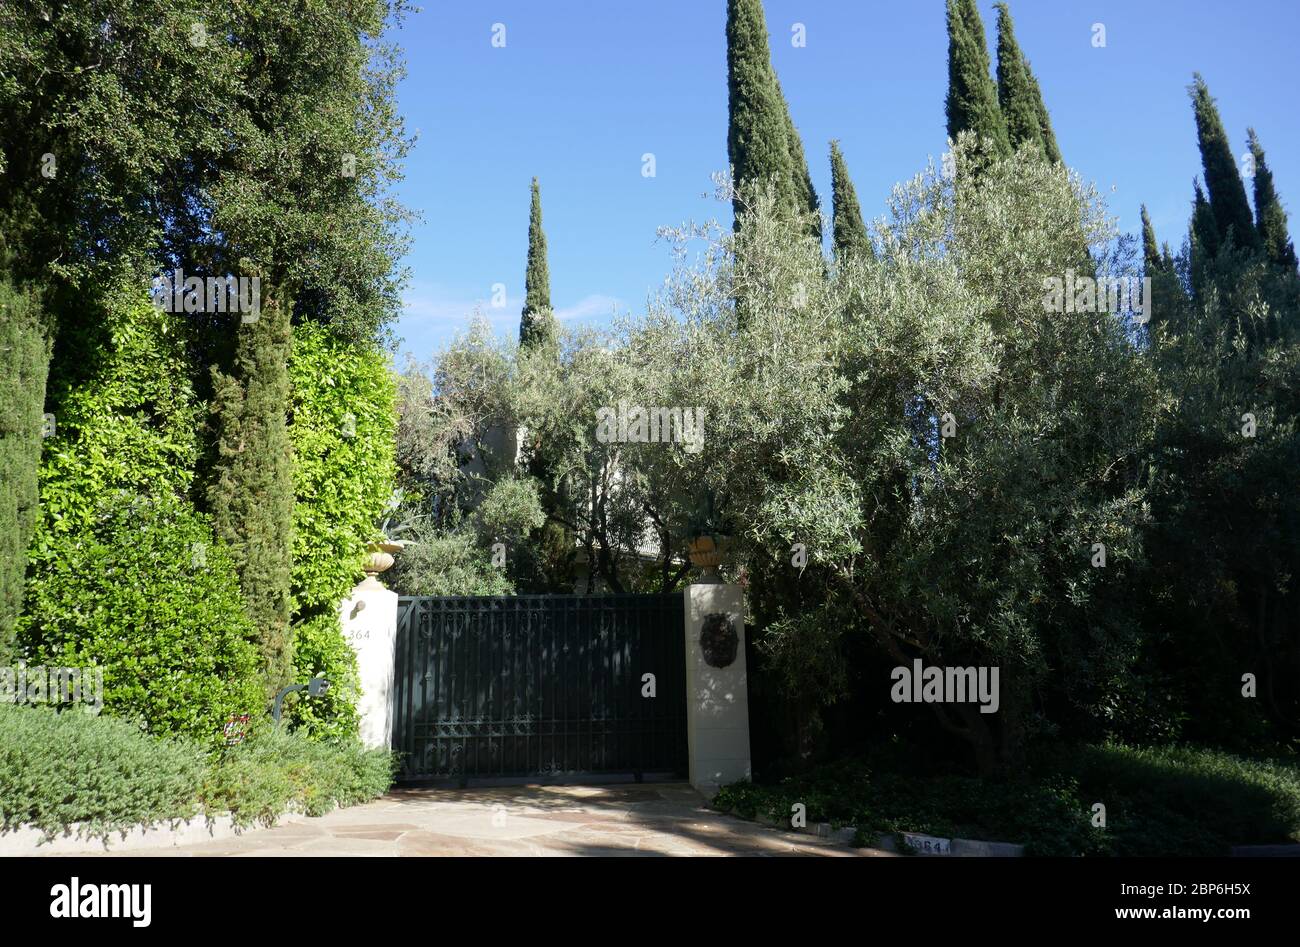 Los Angeles, California, USA 17th May 2020 A general view of atmosphere of former home/residence of singer Cher, singer Sonny Bono, actor Tony Curtis and publisher Larry Flynt at 364 St Cloud Road in Bel Air on May 17, 2020 in Los Angeles, California, USA. Photo by Barry King/Alamy Stock Photo Stock Photo